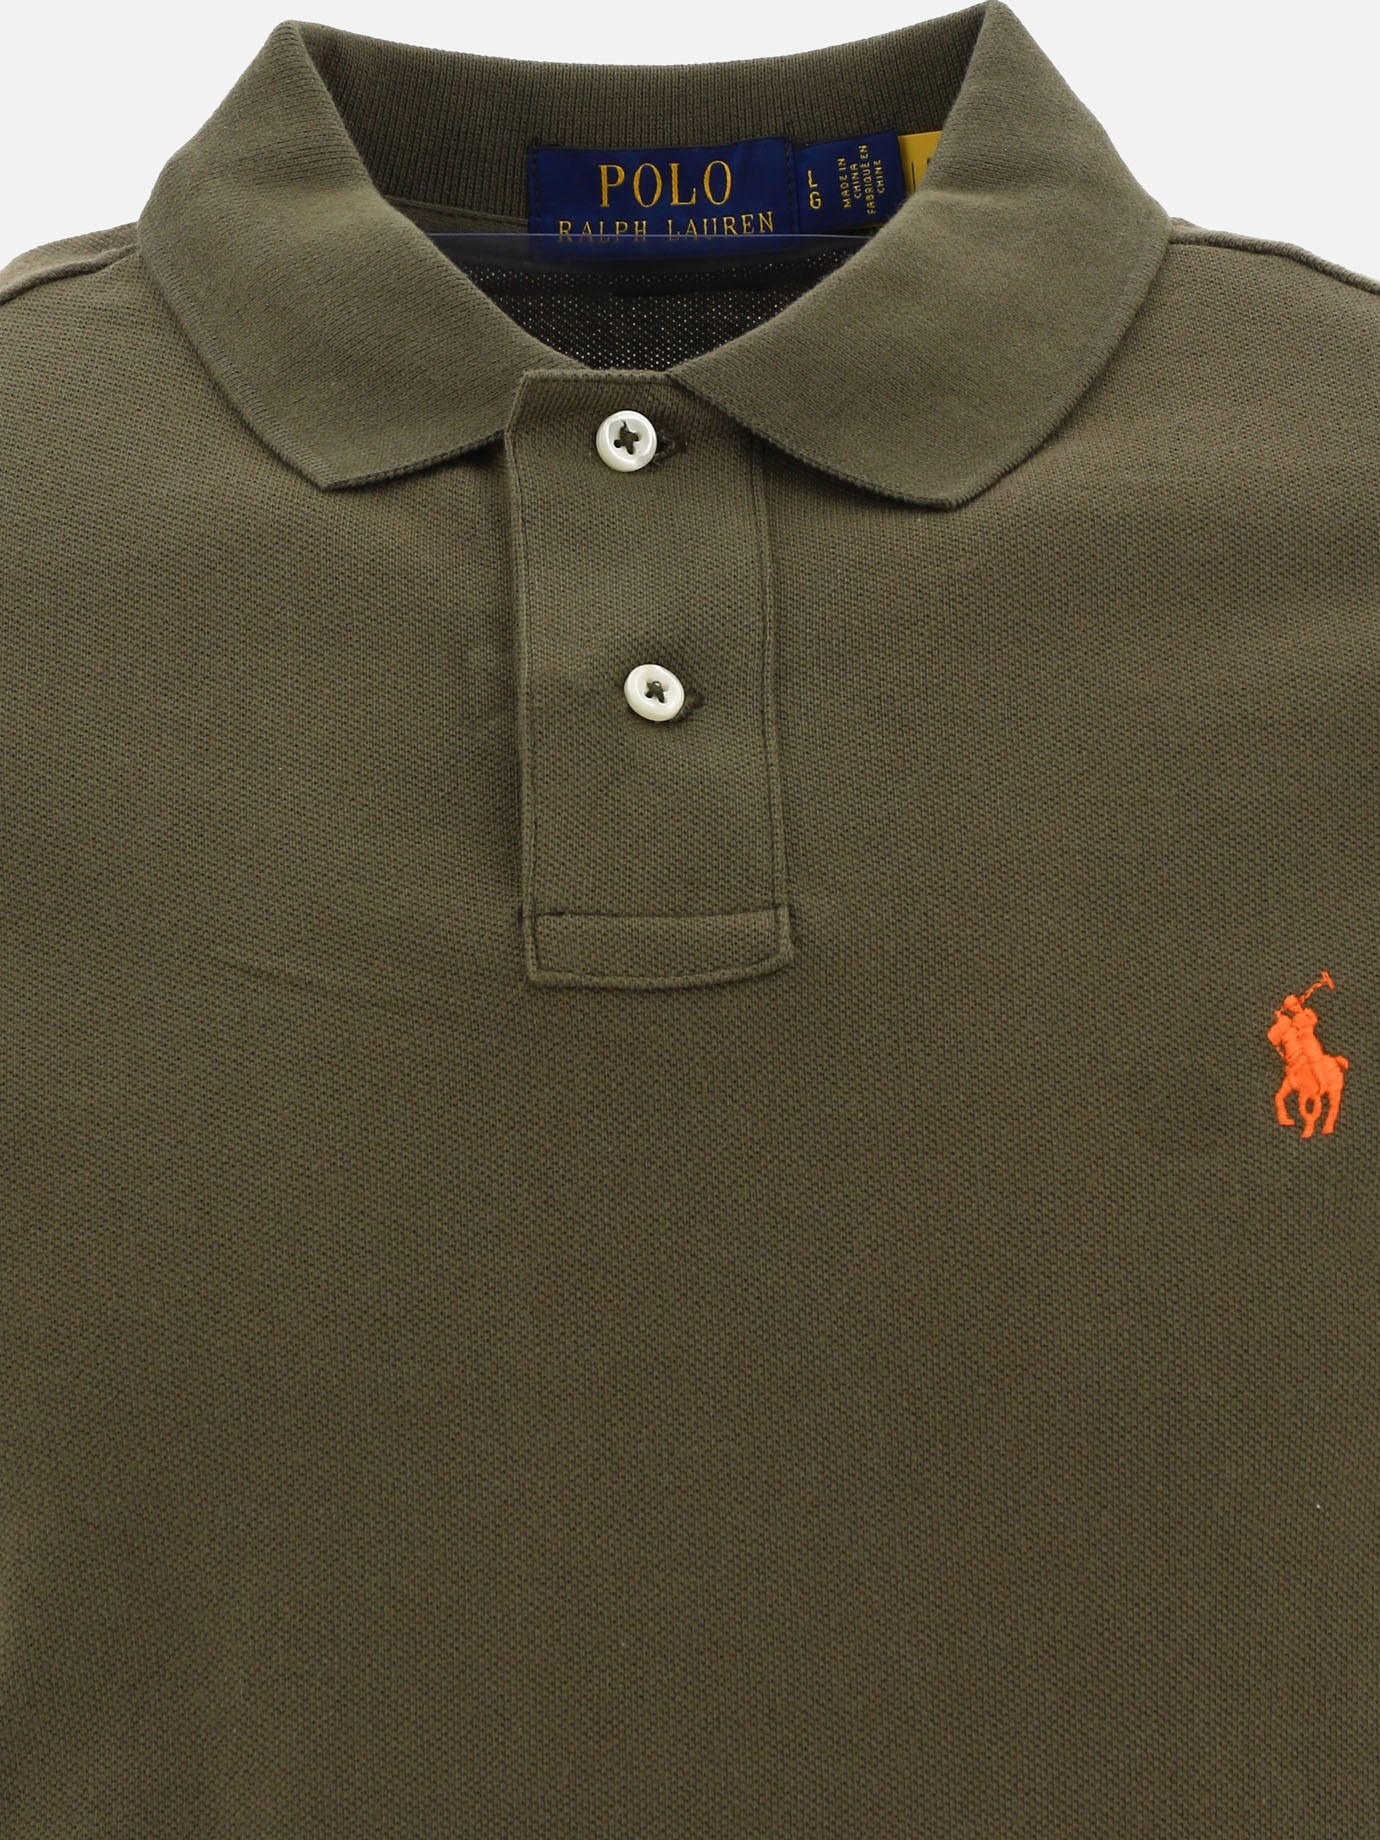  Pony  polo shirt by Polo Ralph Lauren